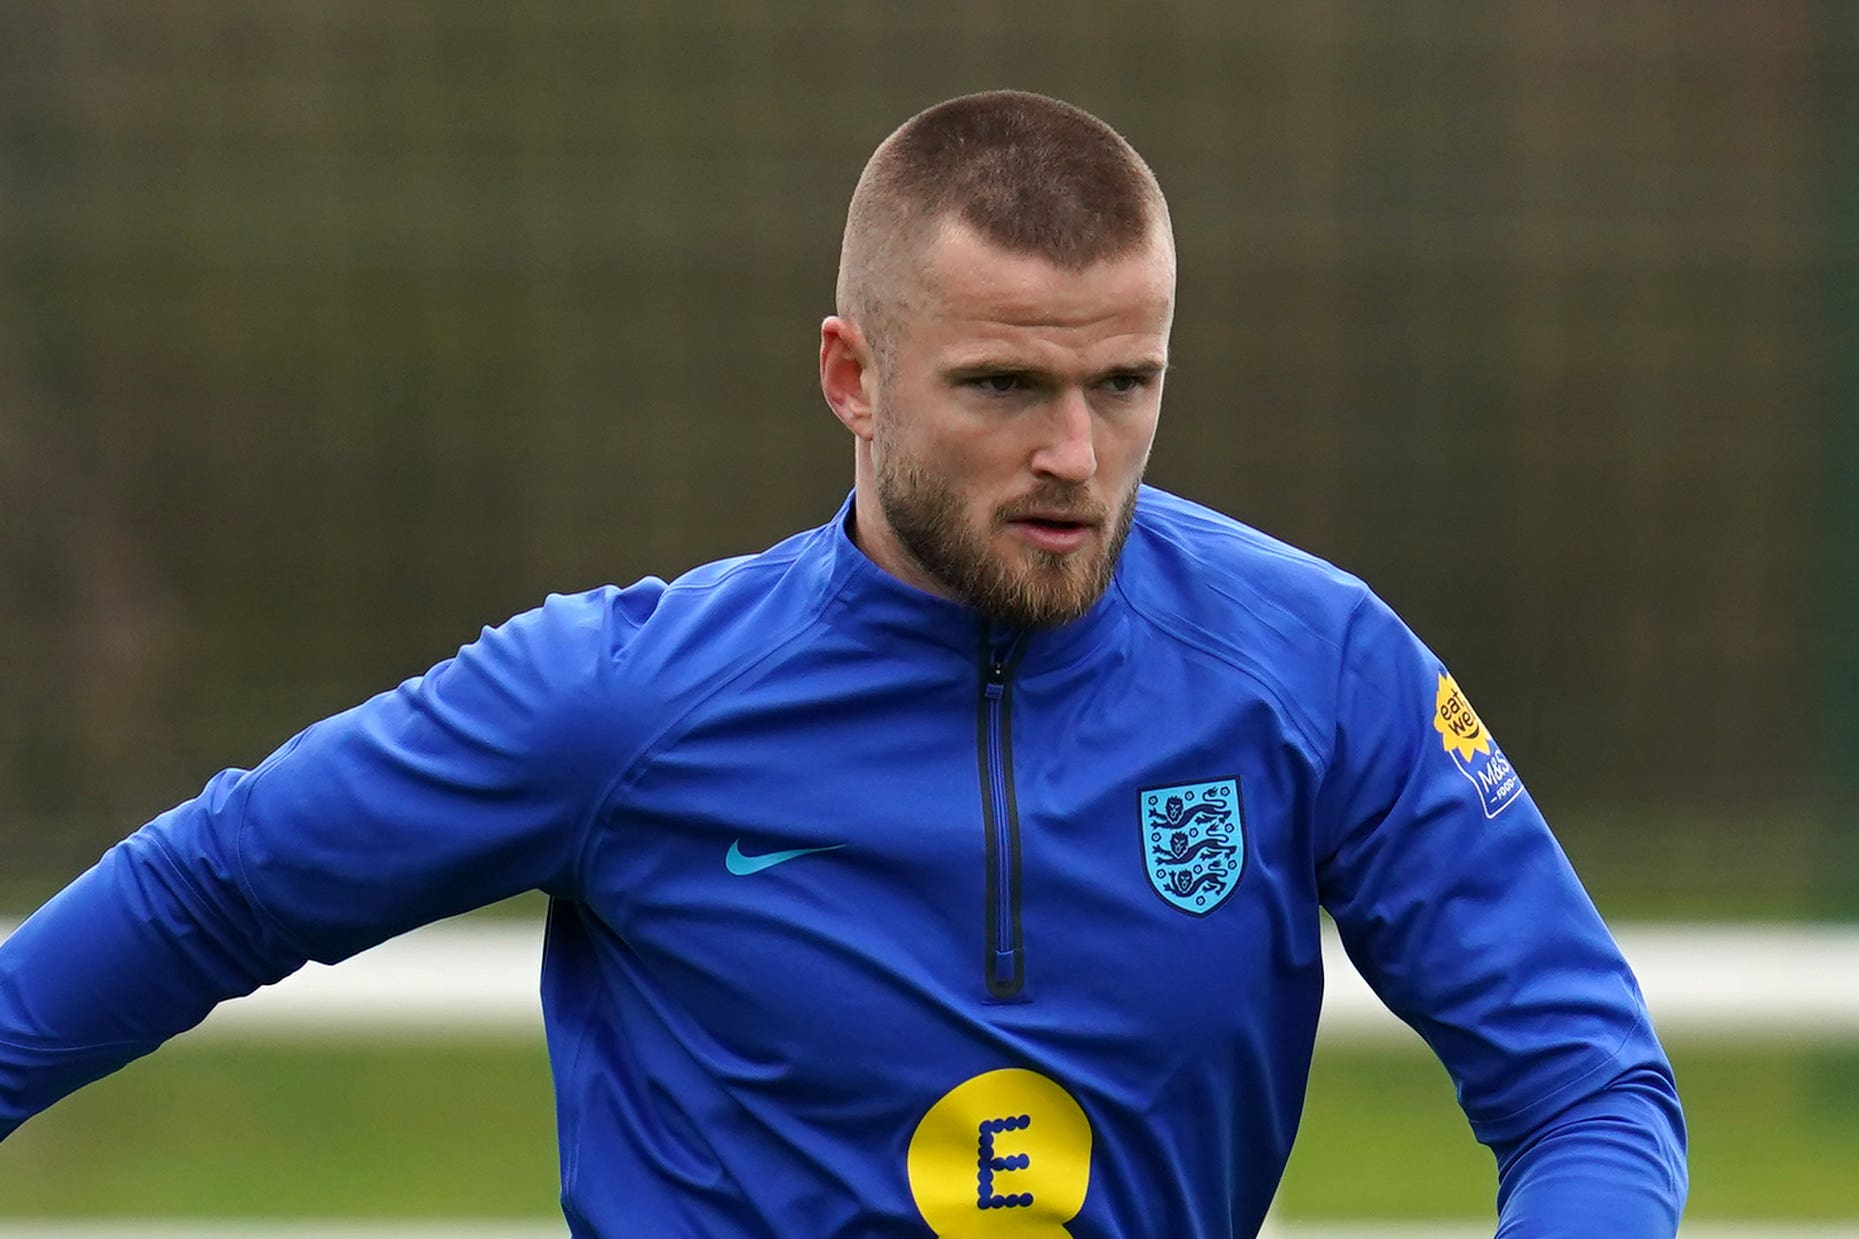 Eric Dier believes he should be in the England squad (Nick Potts/PA)